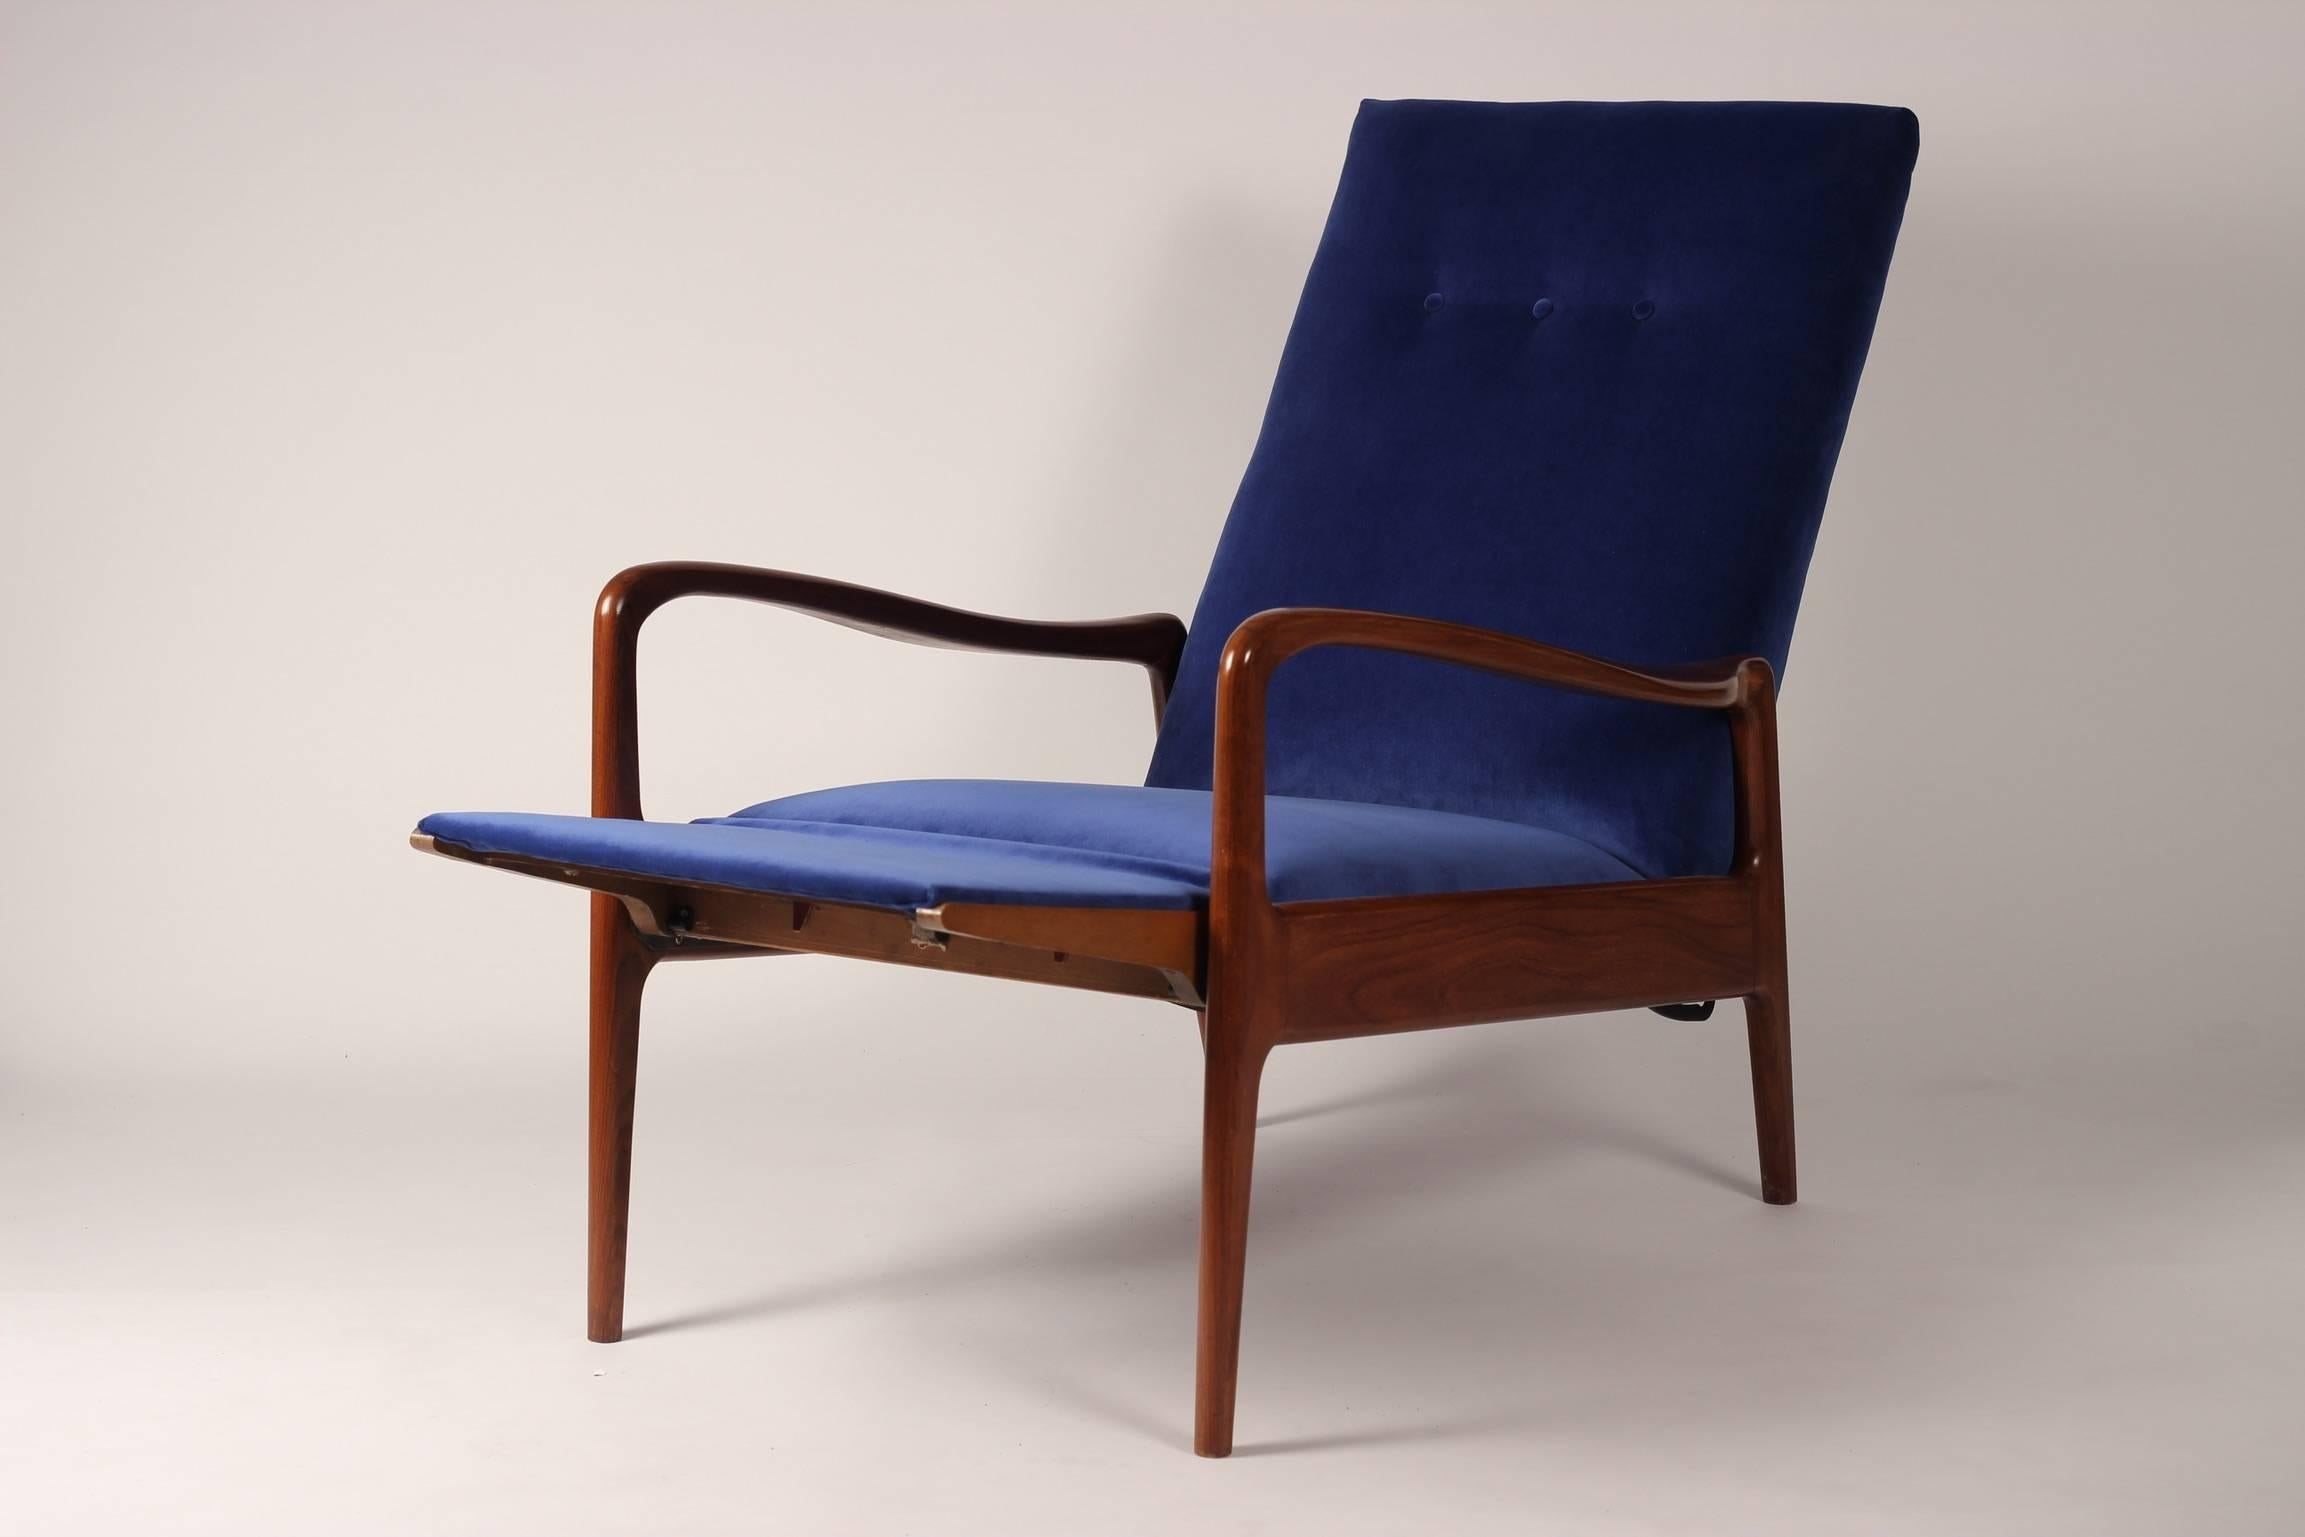 A British-made and designed reclining lounge chair by Greaves and Thomas of Mayfair produced, circa 1960s. With beautiful curved solid Afrormosia (African Teak) arms and angled legs, this chair has recently been reupholstered in an Italian velvet.